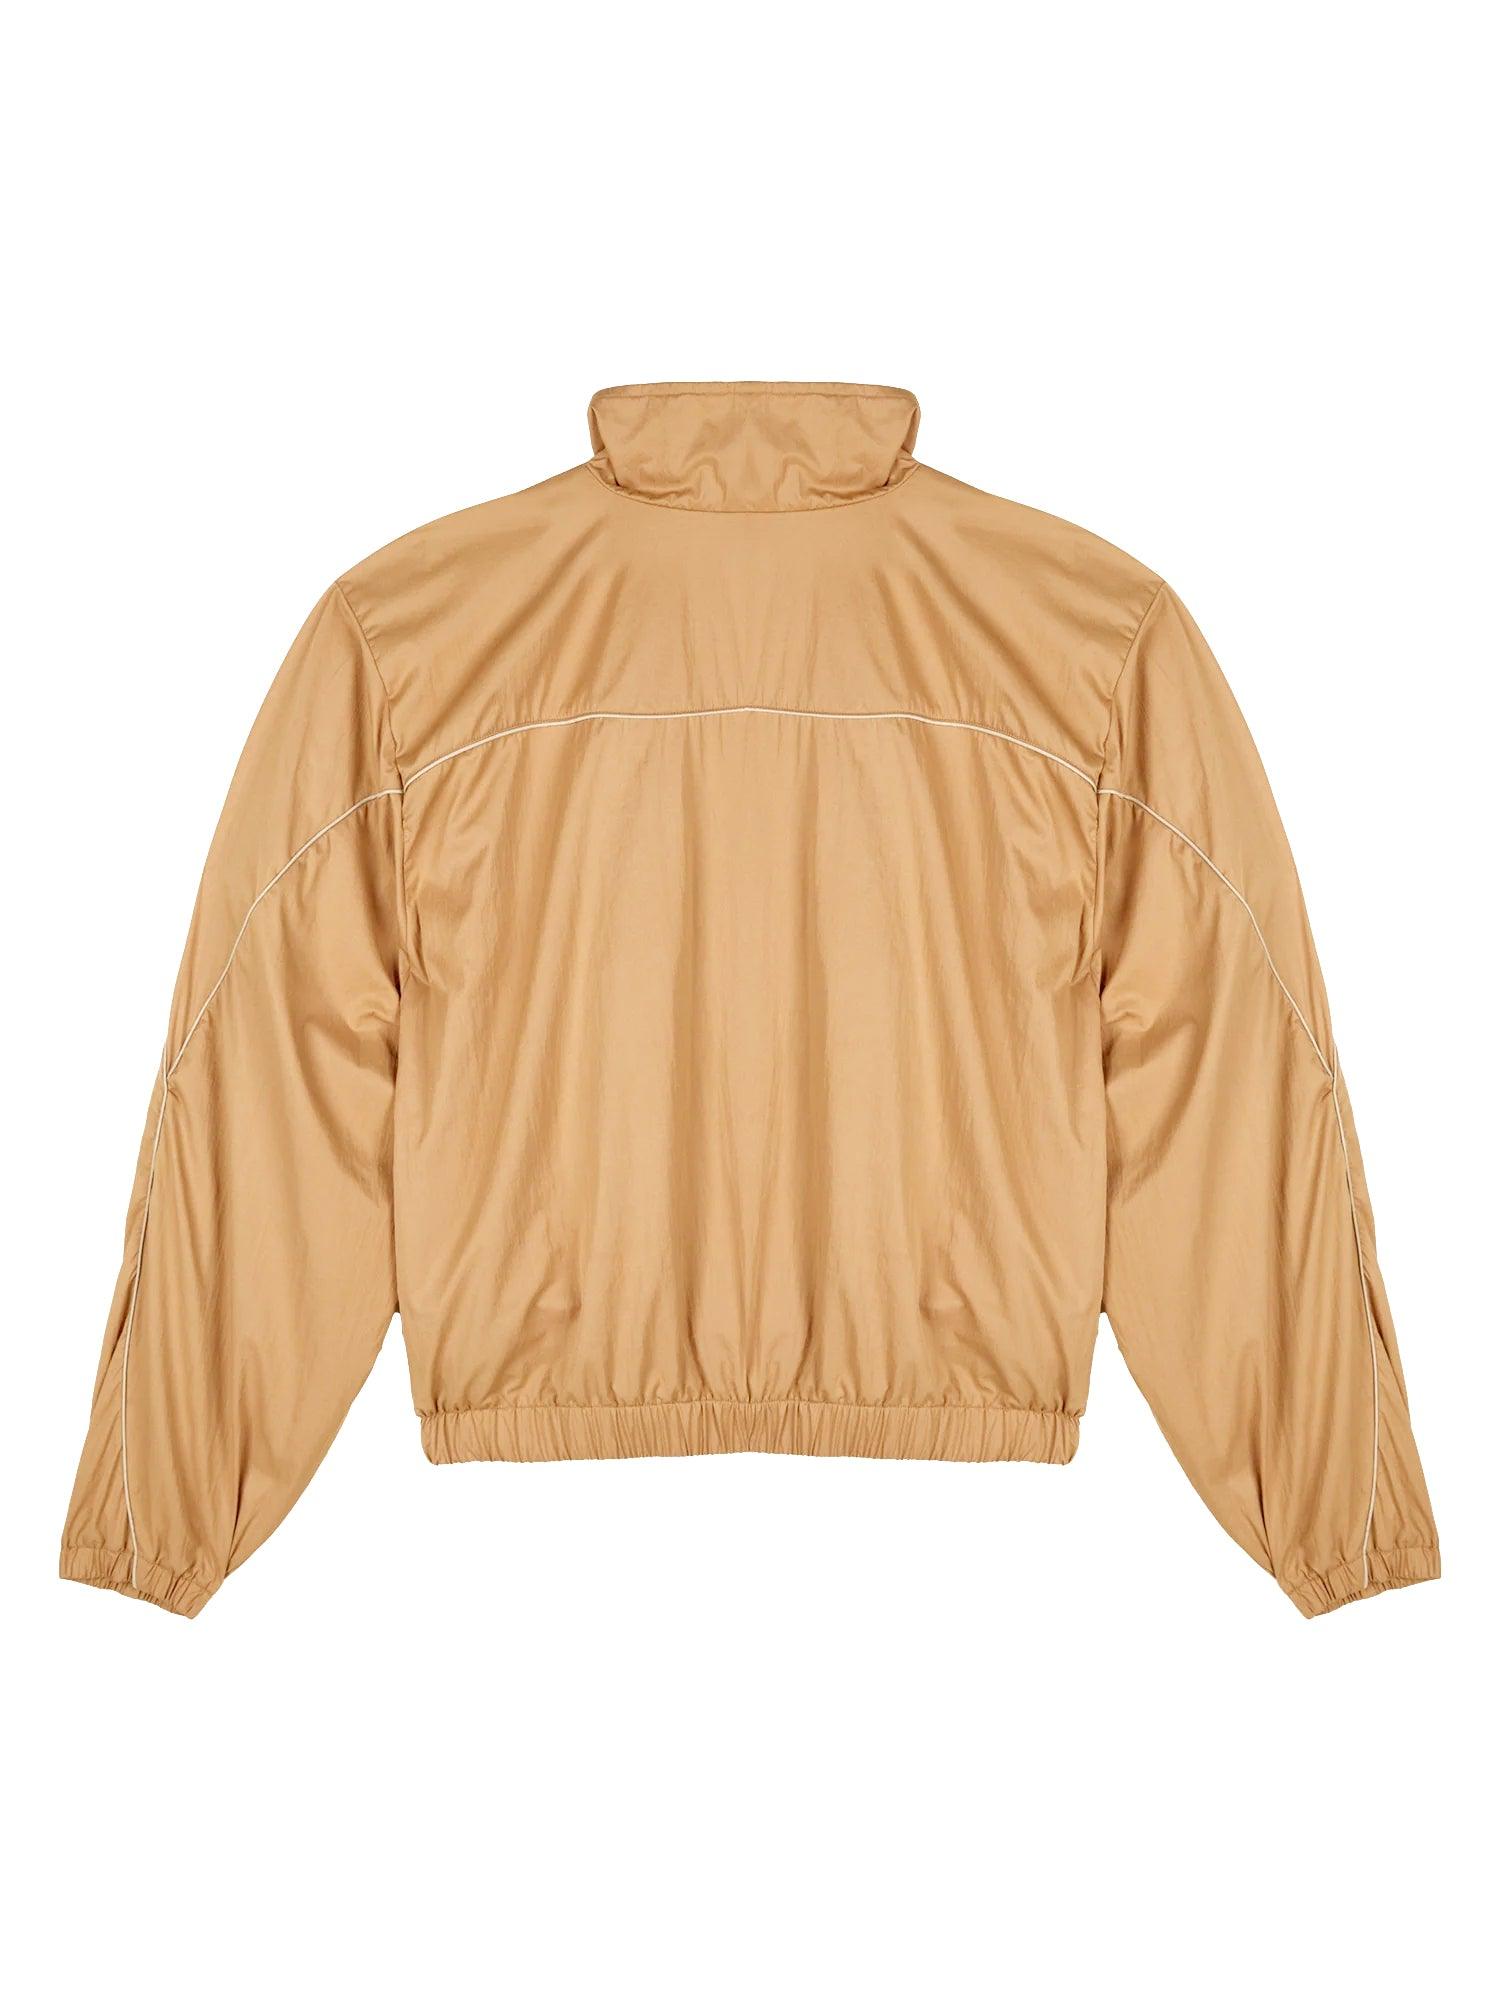 Soon Services Track Jacket